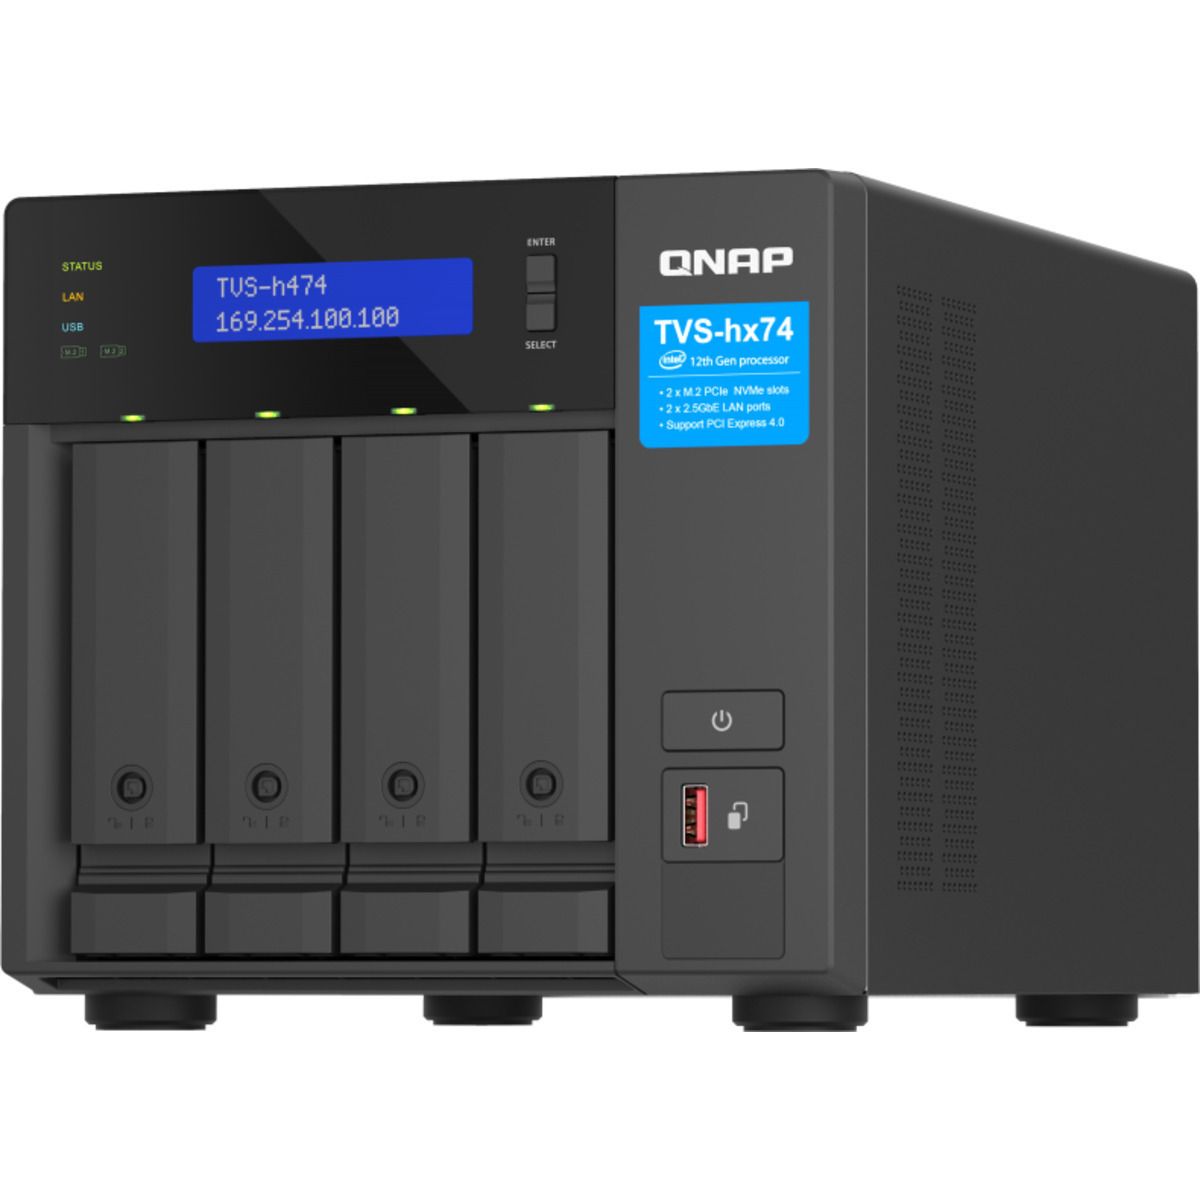 QNAP TVS-h474 Pentium Gold 12tb 4-Bay Desktop Multimedia / Power User / Business NAS - Network Attached Storage Device 3x4tb Seagate EXOS 7E10 ST4000NM024B 3.5 7200rpm SATA 6Gb/s HDD ENTERPRISE Class Drives Installed - Burn-In Tested - FREE RAM UPGRADE TVS-h474 Pentium Gold